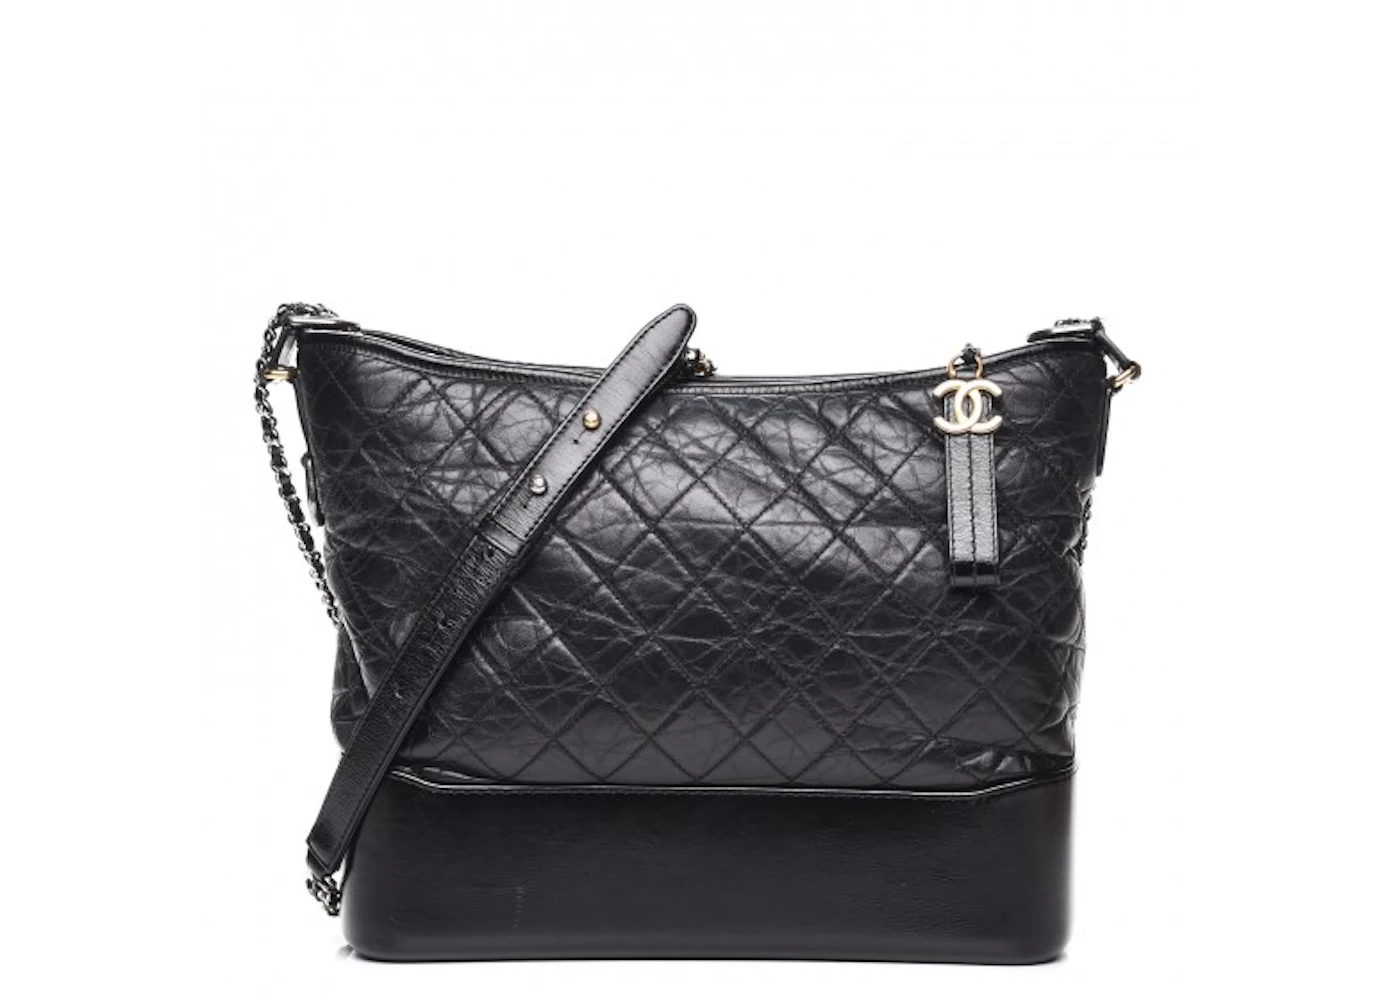 Mybagfast - Chanel Gabrielle Aged Calfskin Hobo Comes with: Full